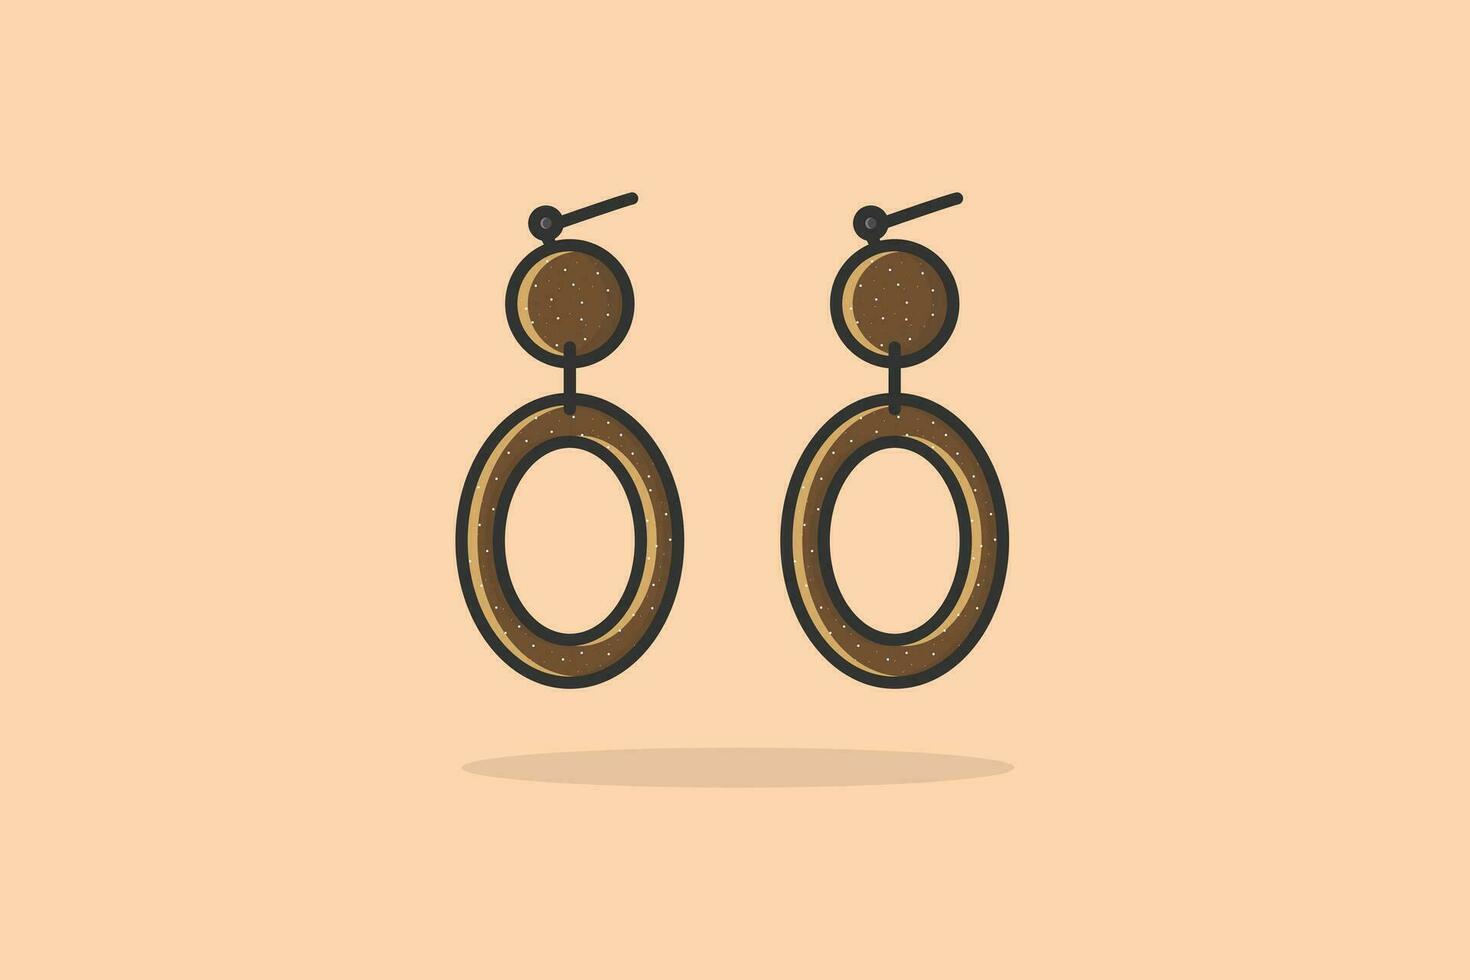 Ear jewelry for modern girls vector illustration. Beauty fashion objects icon concept. Lady earring with gemstone vector design.